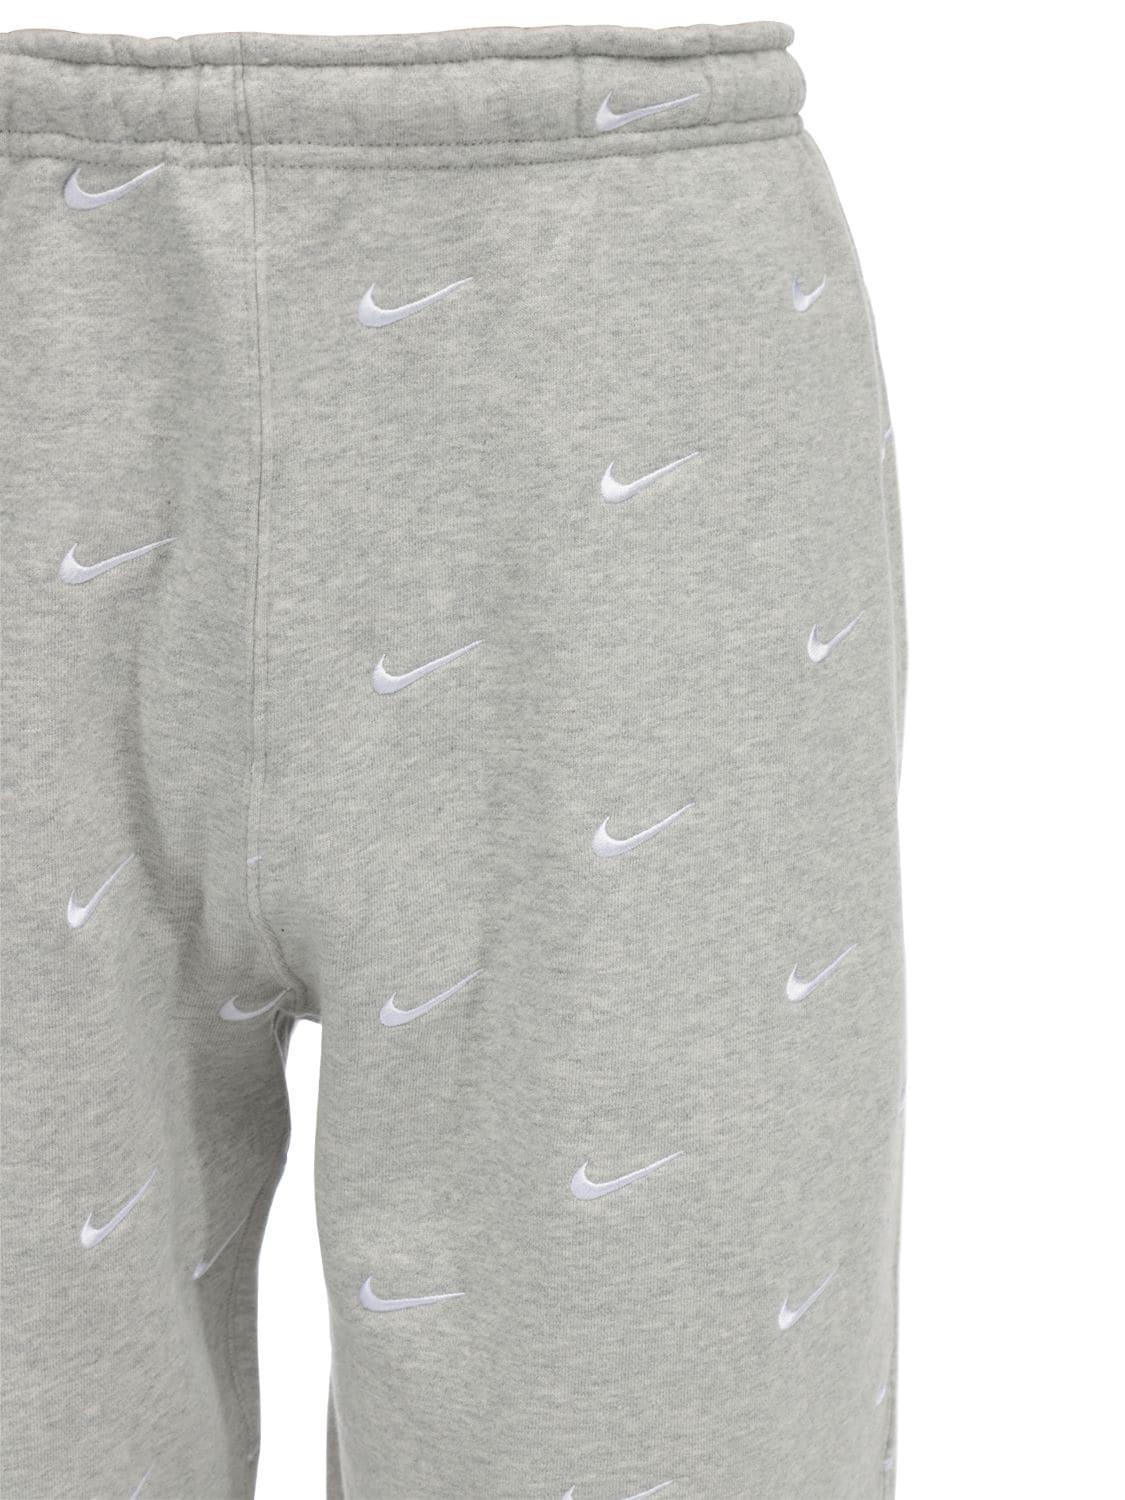 Nike Nrg Sweat Pant in Grey Heather (Gray) for Men | Lyst